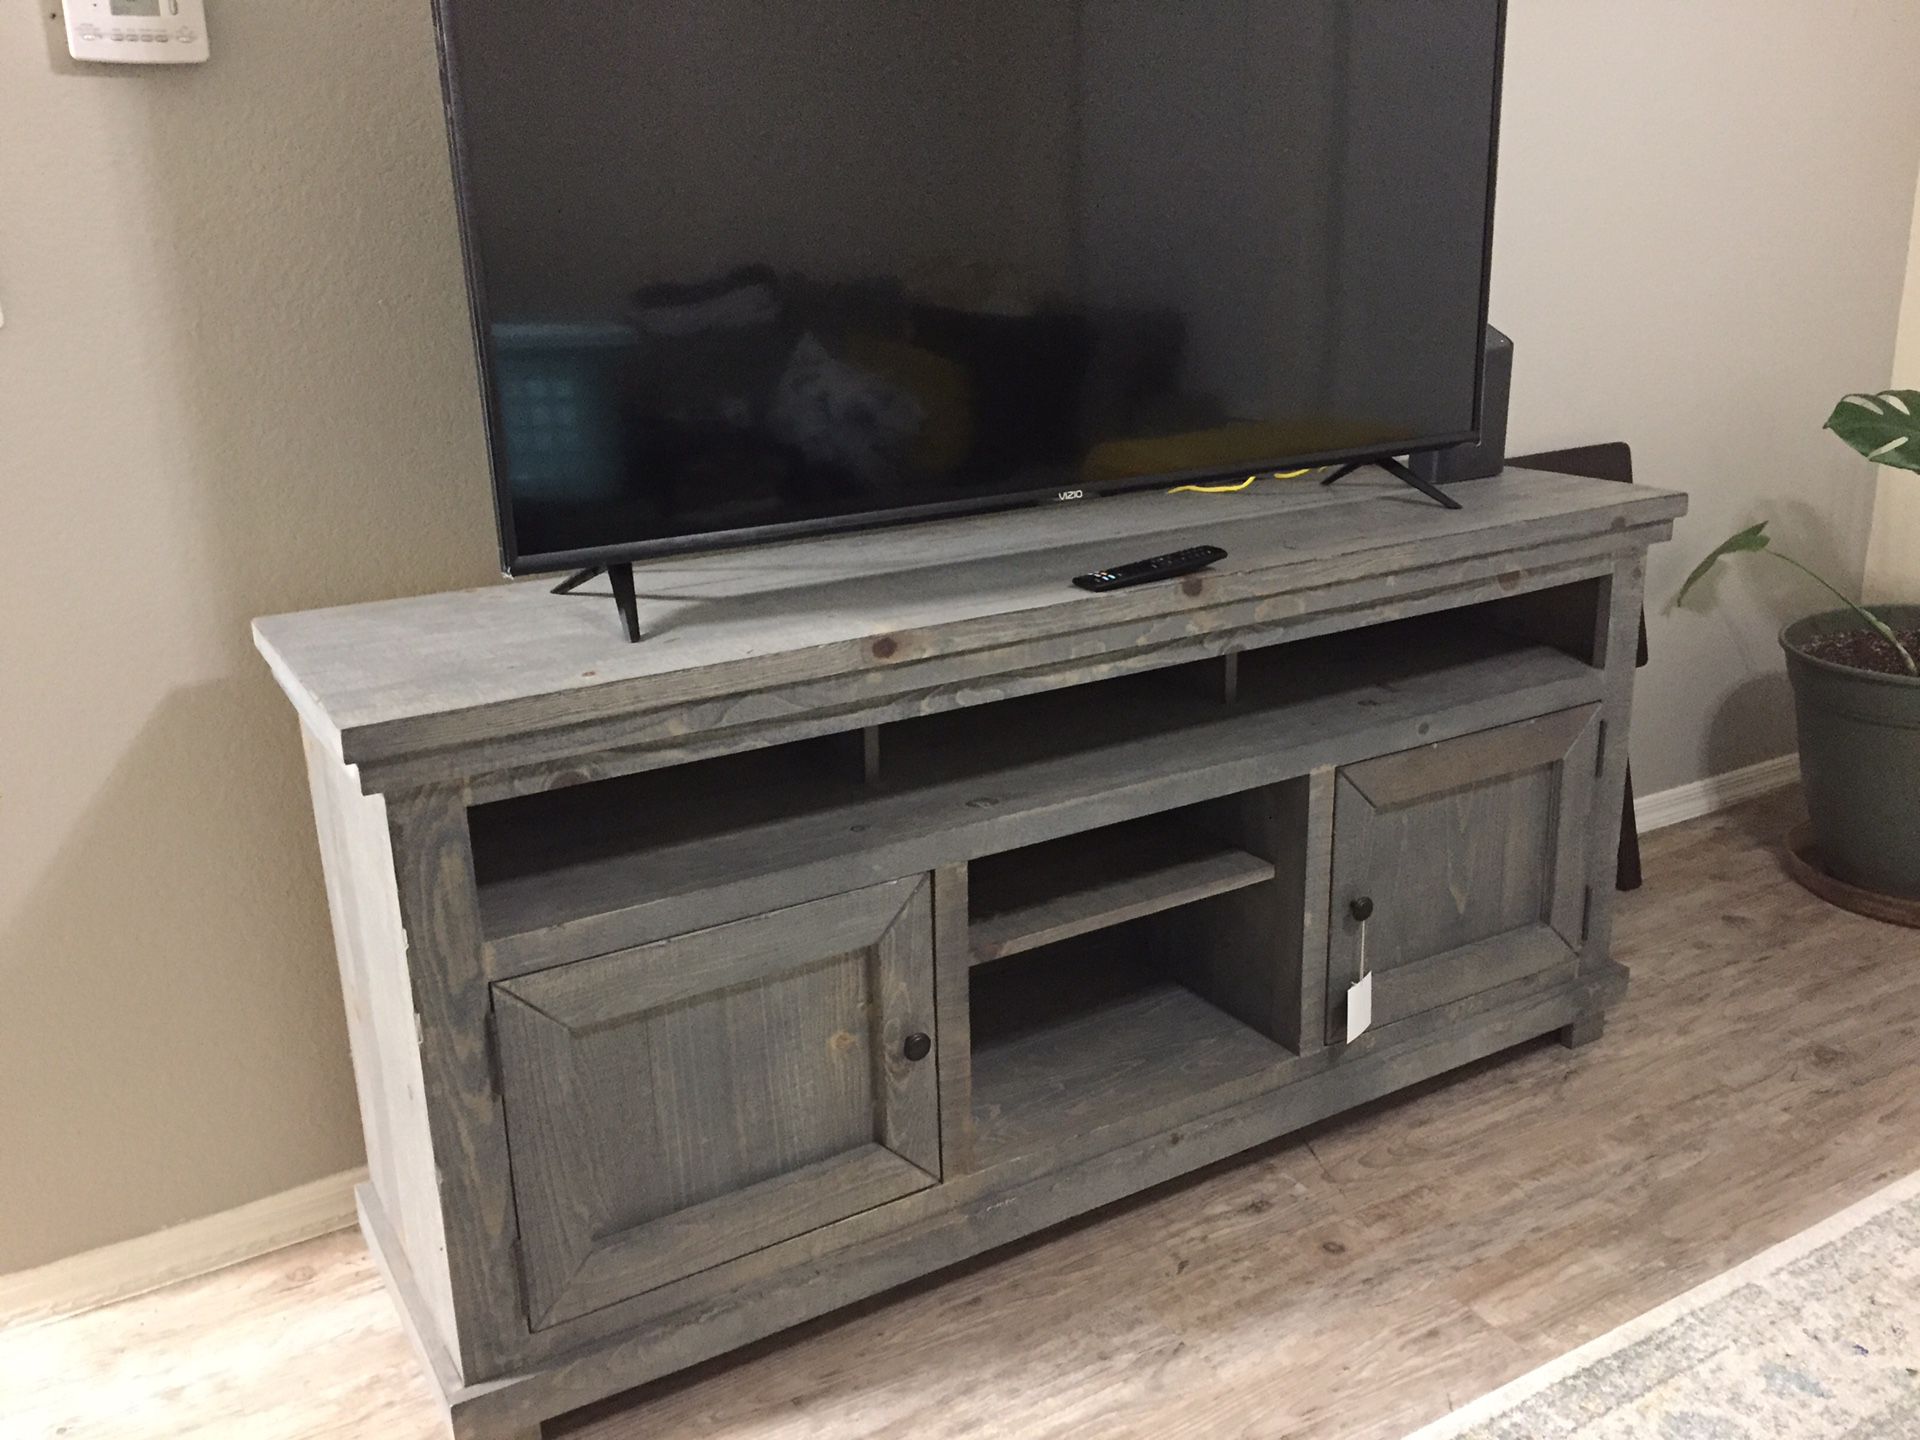 64” distressed blue Tv stand